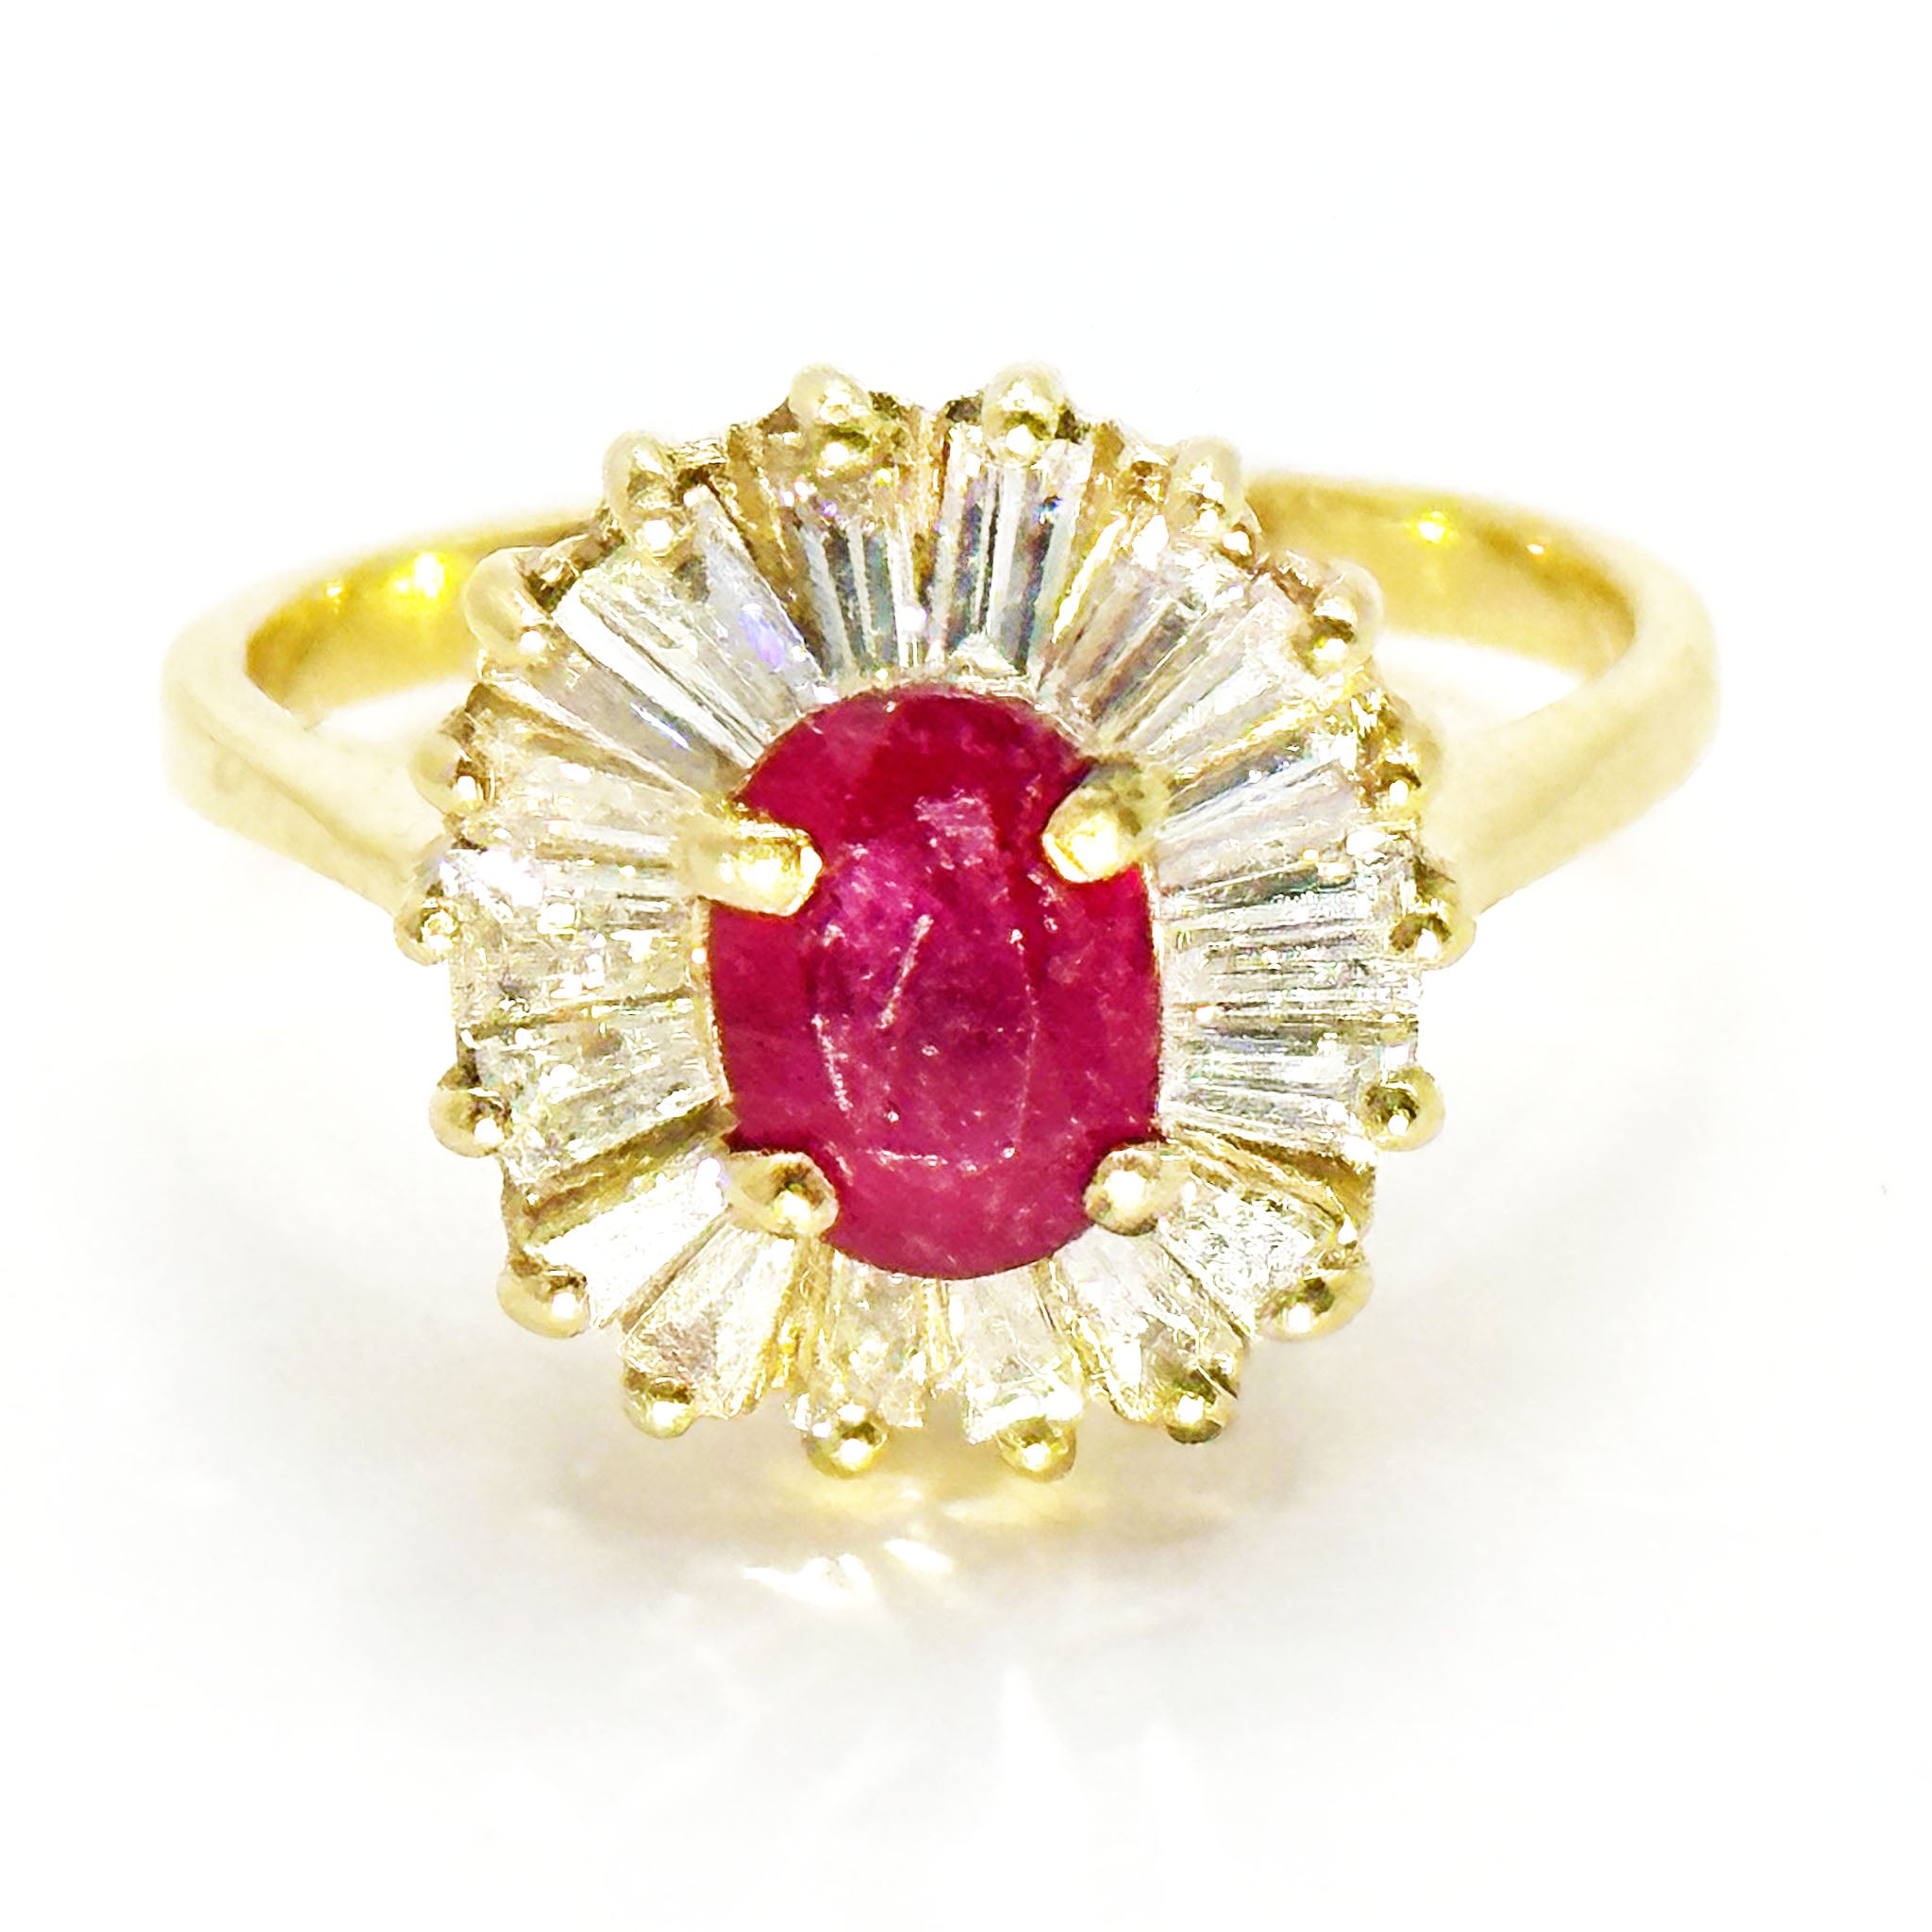 $5900 1.99Ct Yellow Gold Baguette Diamond and Ruby Cocktail Ring 14Kt